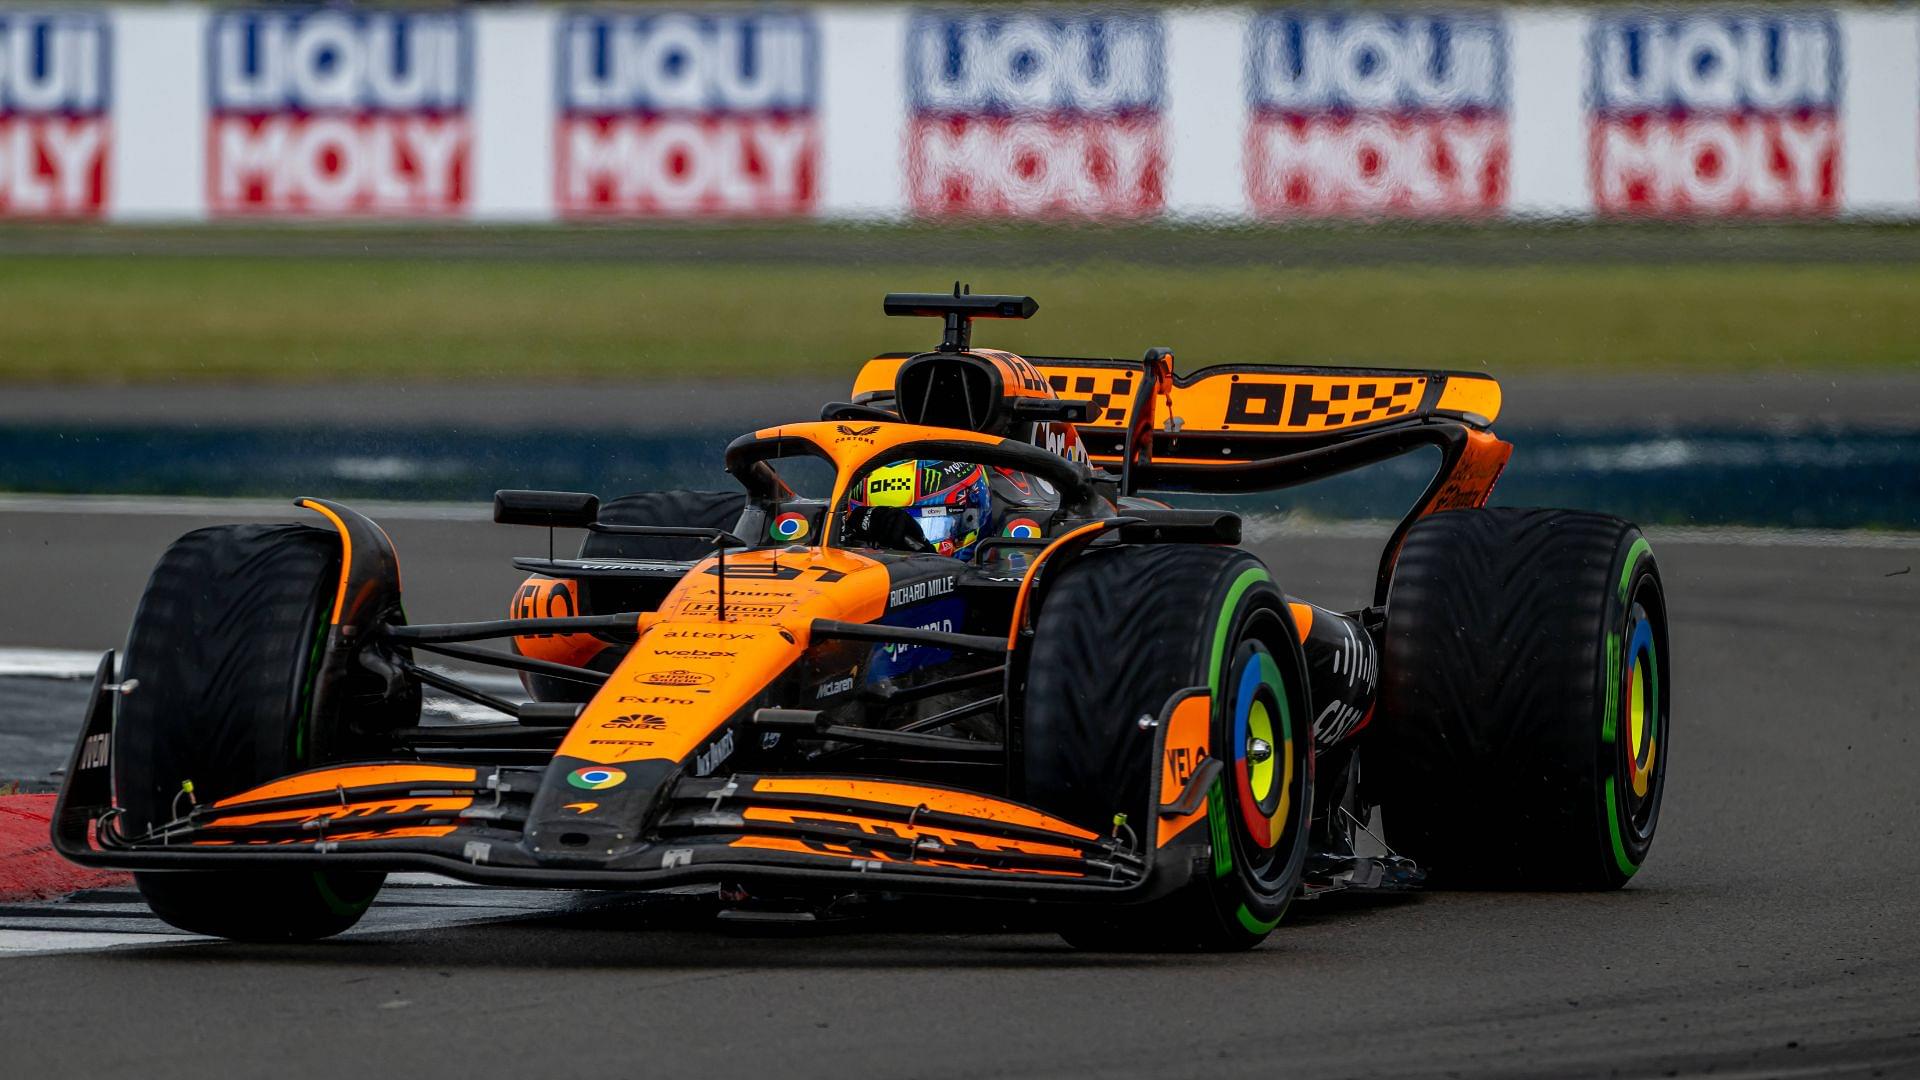 McLaren Driver Questions His Team for Missed Race Win Opportunity Due to Oscar Piastri Call